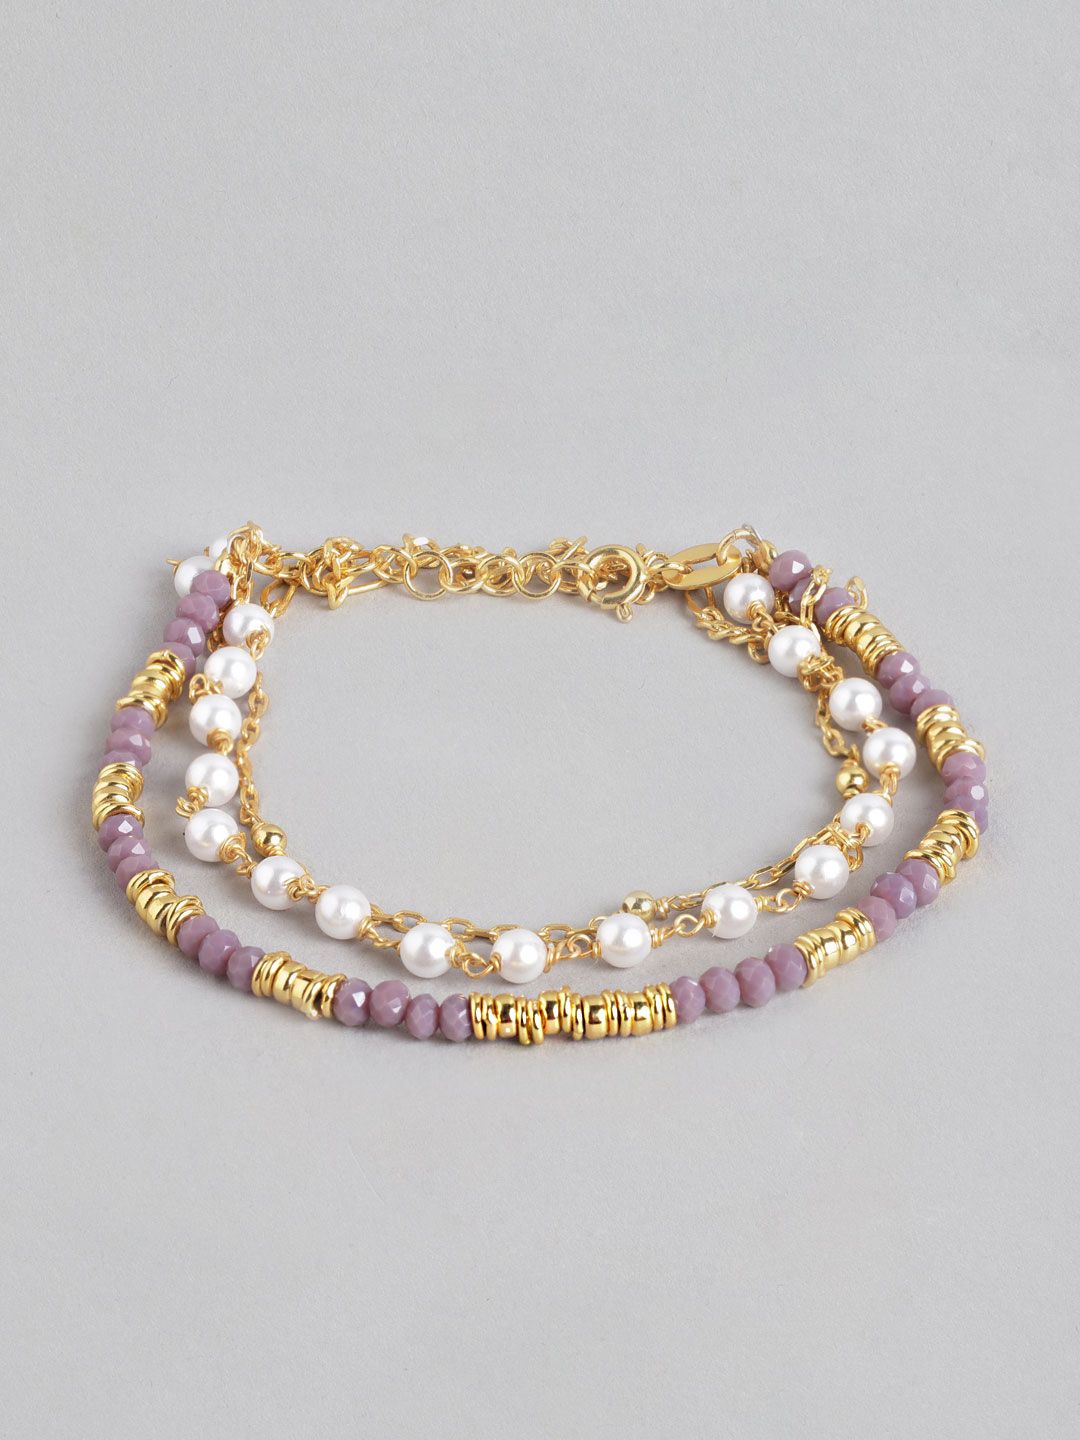 Carlton London Gold-Plated White Pearls Handcrafted Multistrand Bracelet Price in India